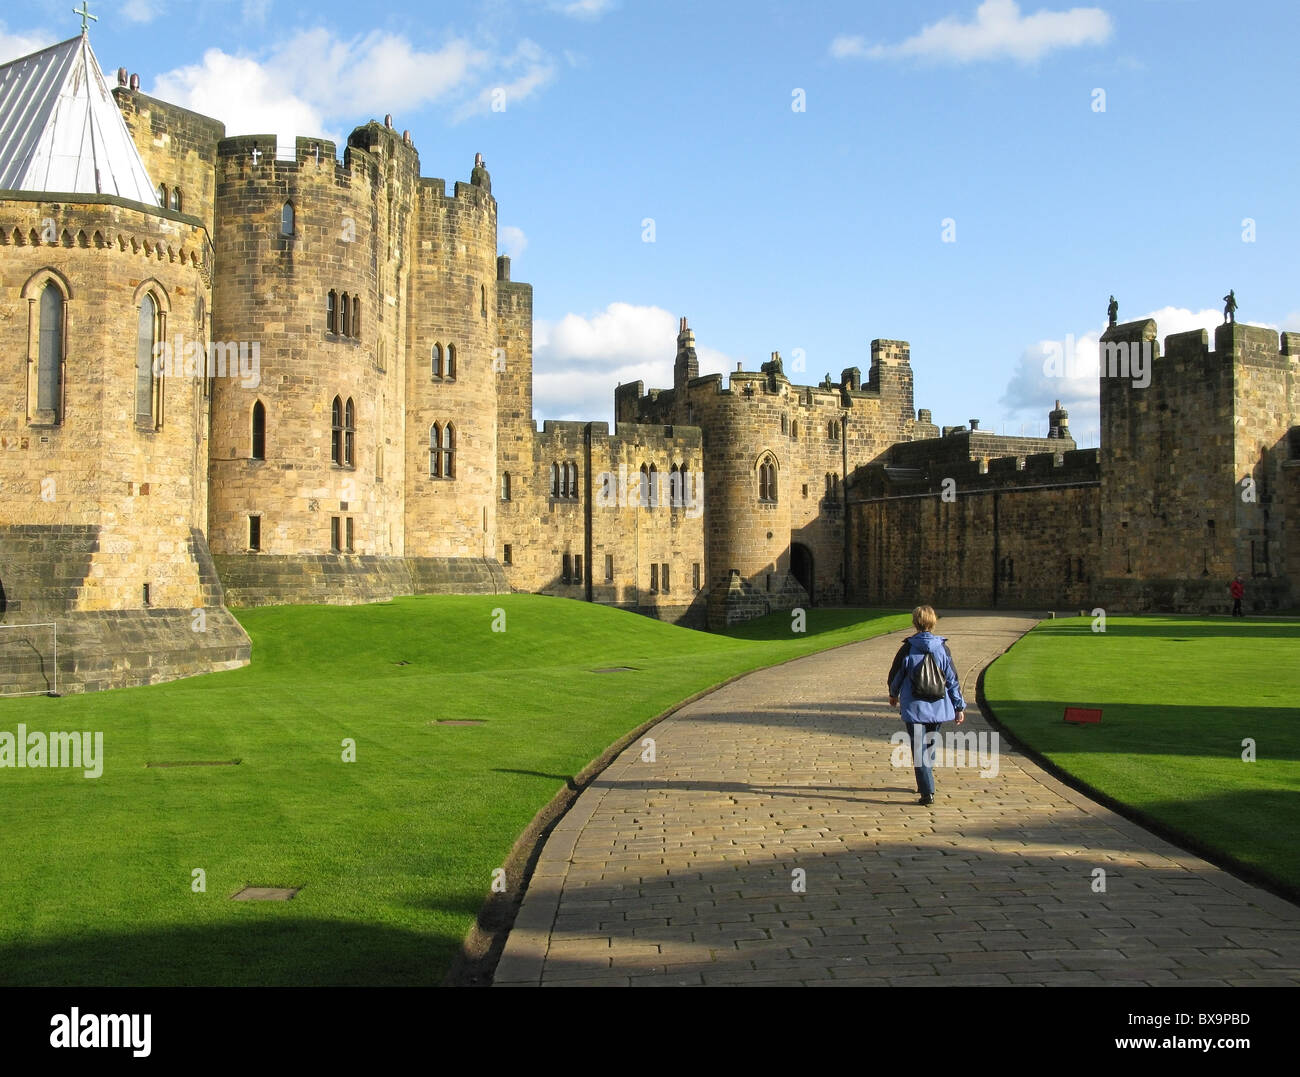 Alnwick Castle seen from inside the curtain wall, Alnwick, Northumberland, England, UK. Stock Photo